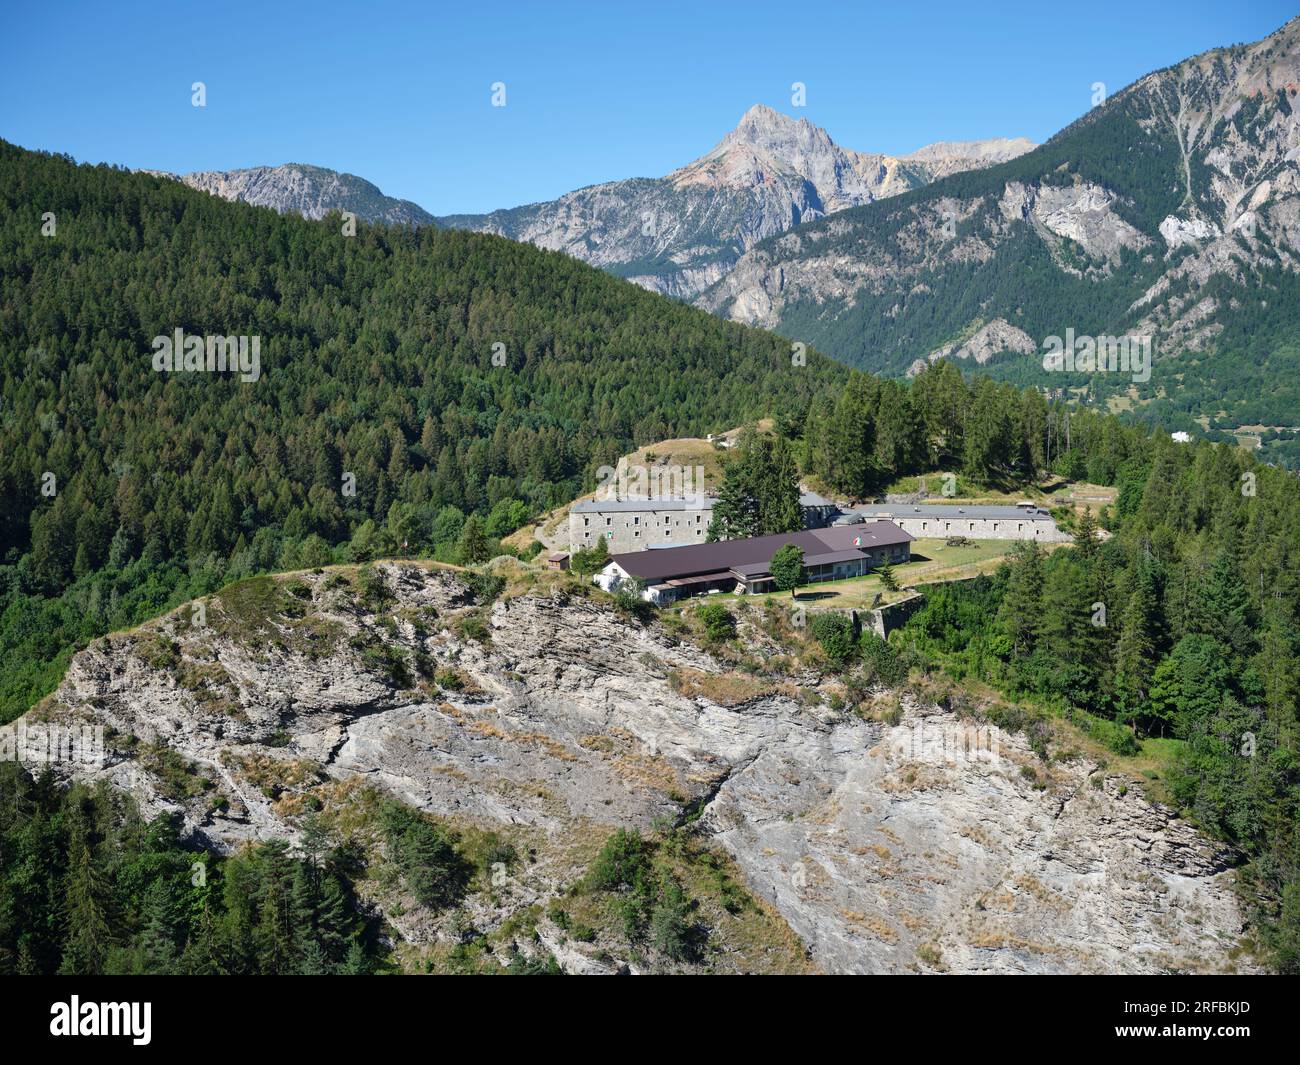 AERIAL VIEW. Bramafam Fort, a military fortification on a clifftop overlooking the upper Susa Valley. Bardonecchia, Metropolitan City of Turin, Italy. Stock Photo